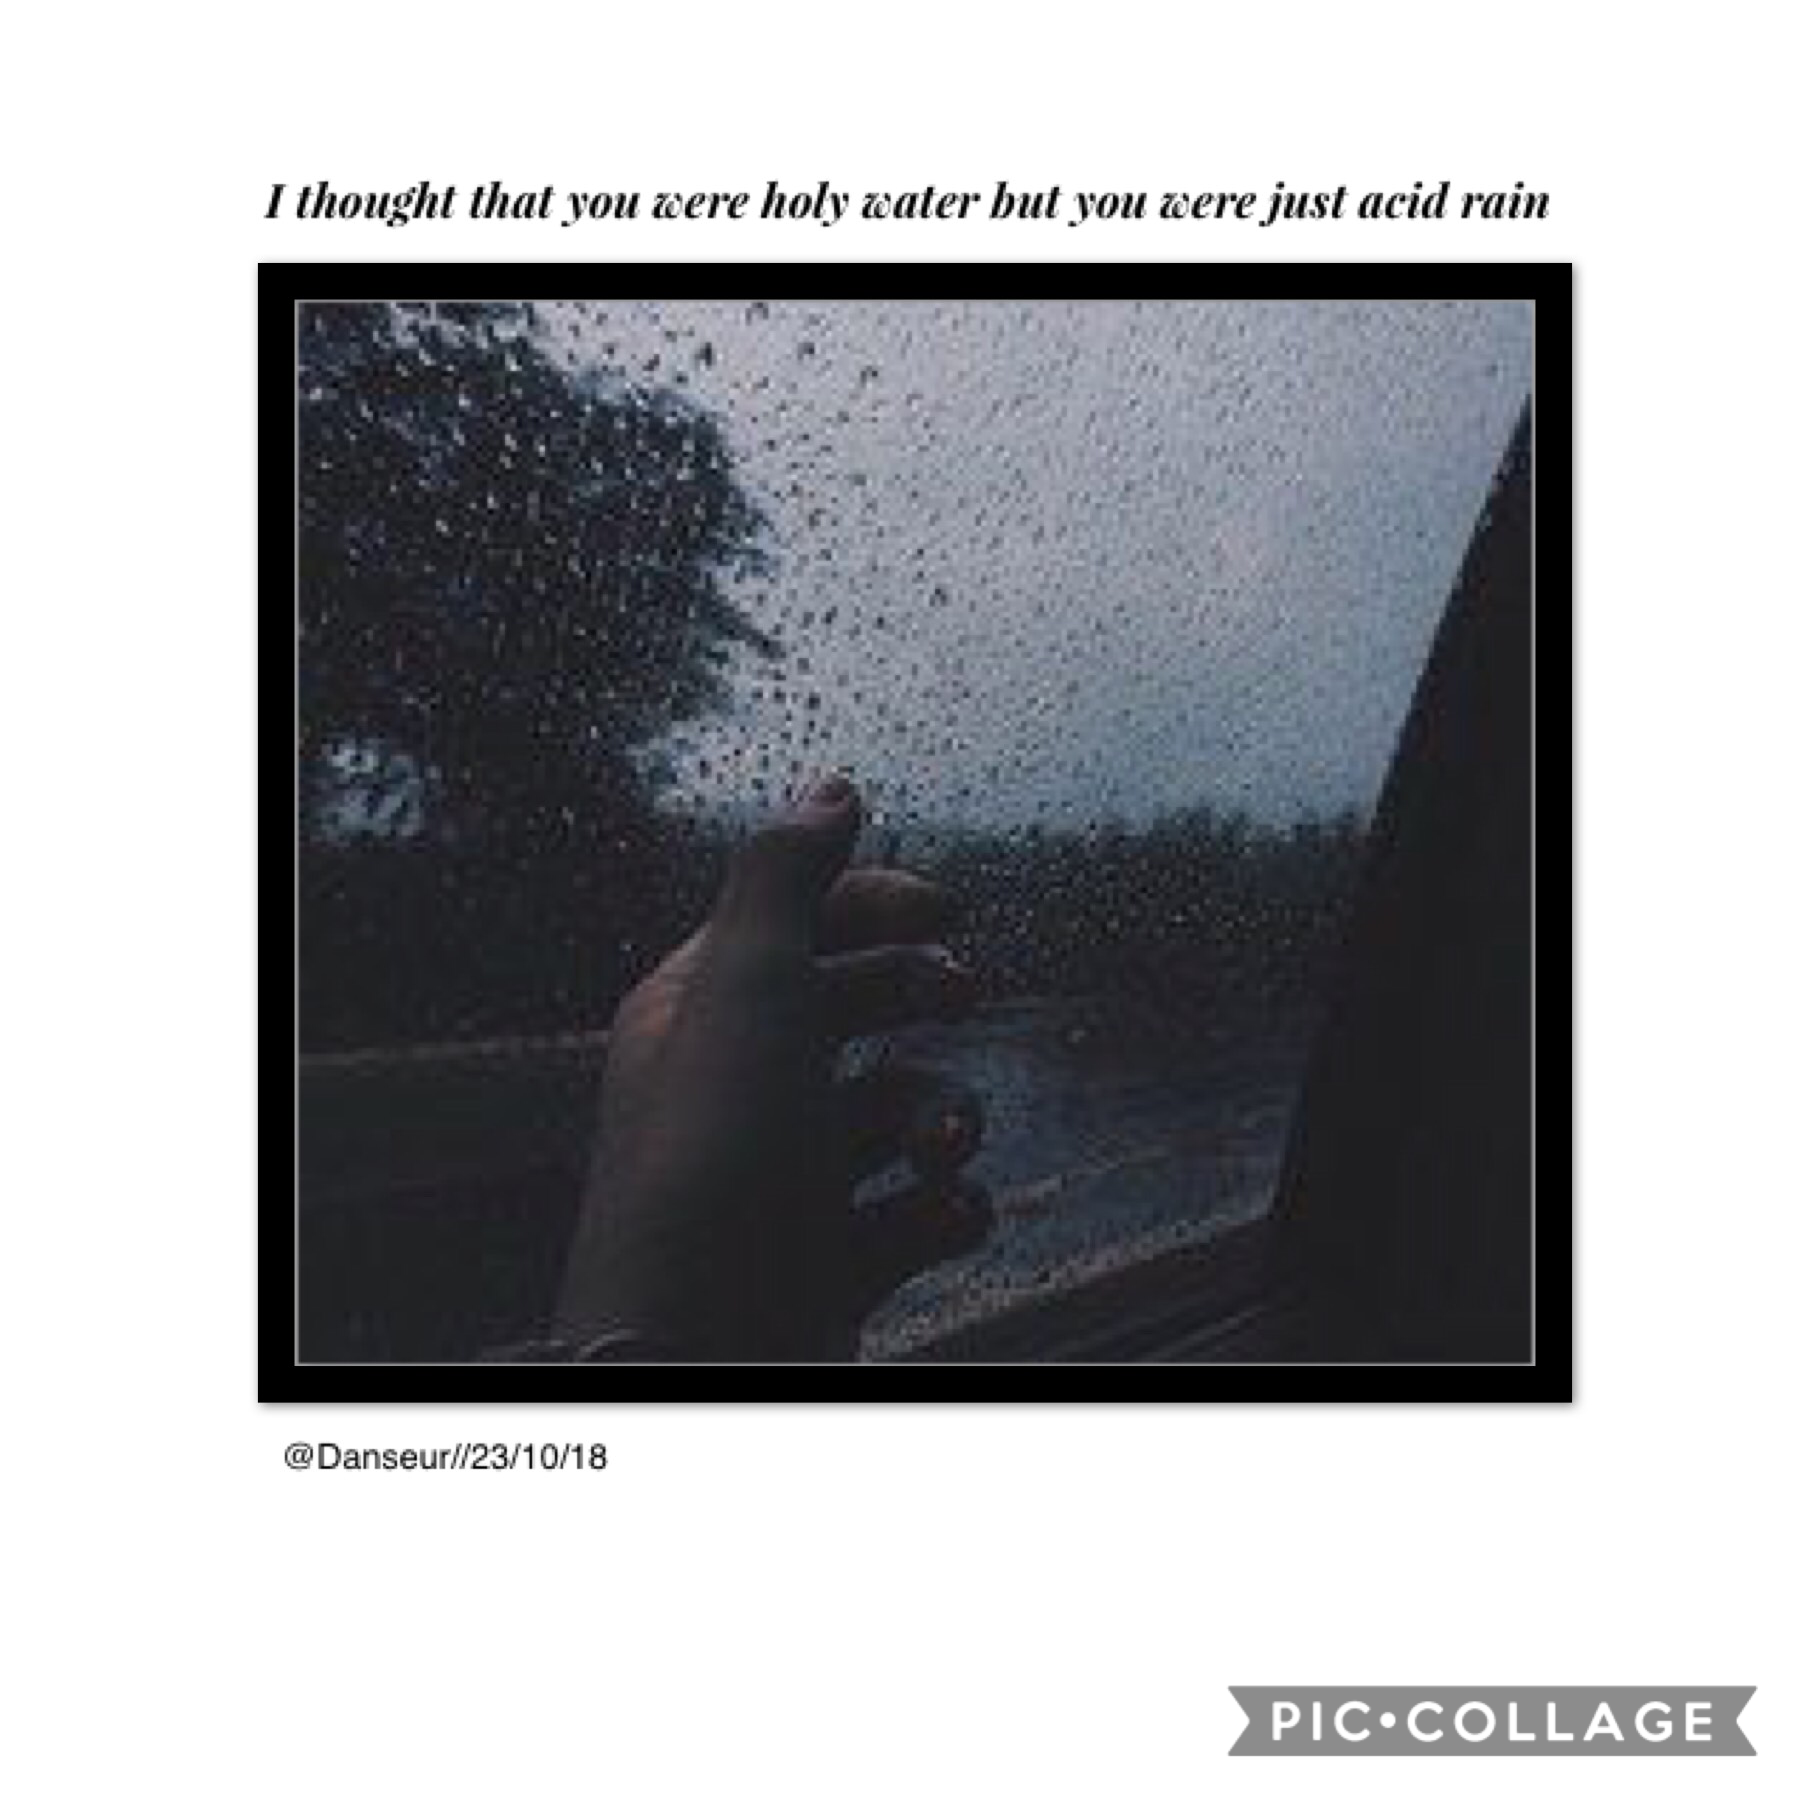 🖤tap🖤
🎶Acid Rain- Thomston
My crush asked me out today 💞
New theme! I deleted and re-uploaded my newest collages with a white barrier, gonna start doing that!  Listen to this song please, it’s so good 
Bye -Danseur ❤️